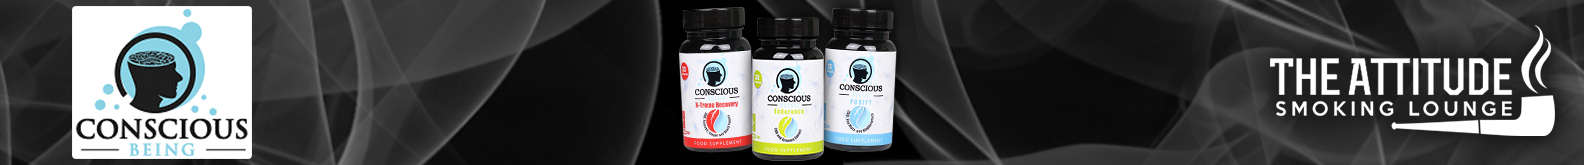 Conscious Being CBD Supplements